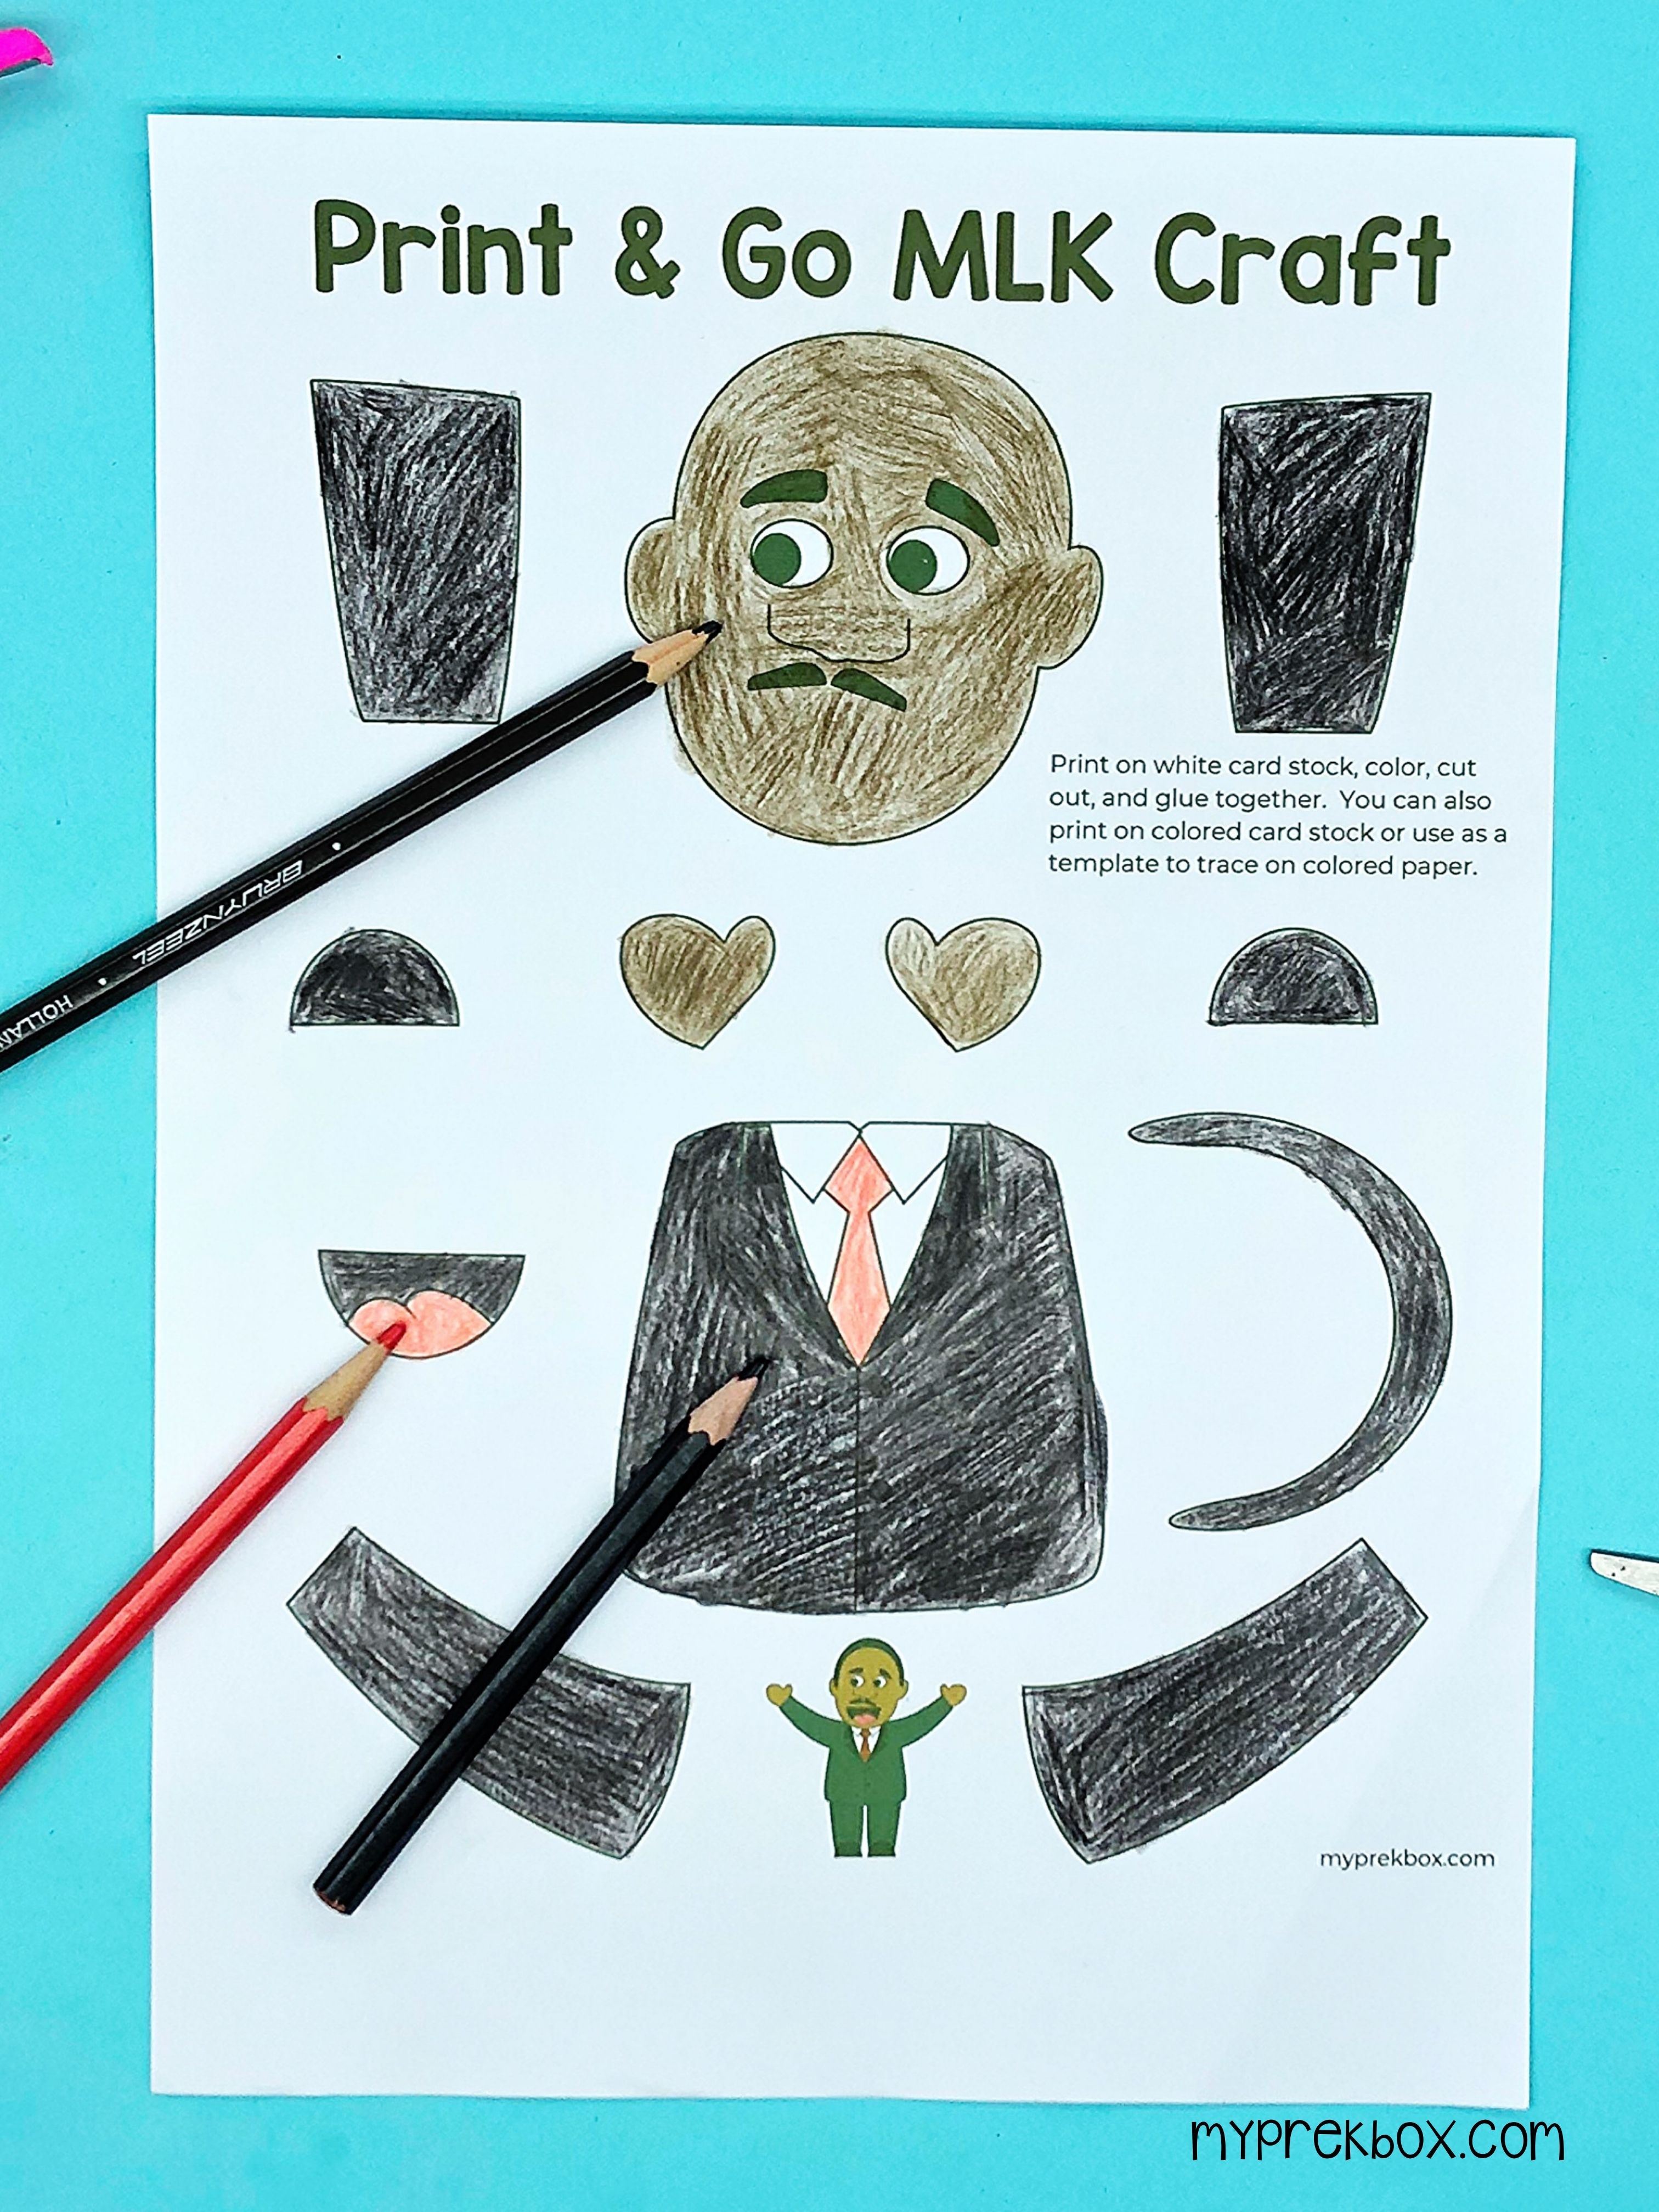 Colored Martin Luther King craft for kids